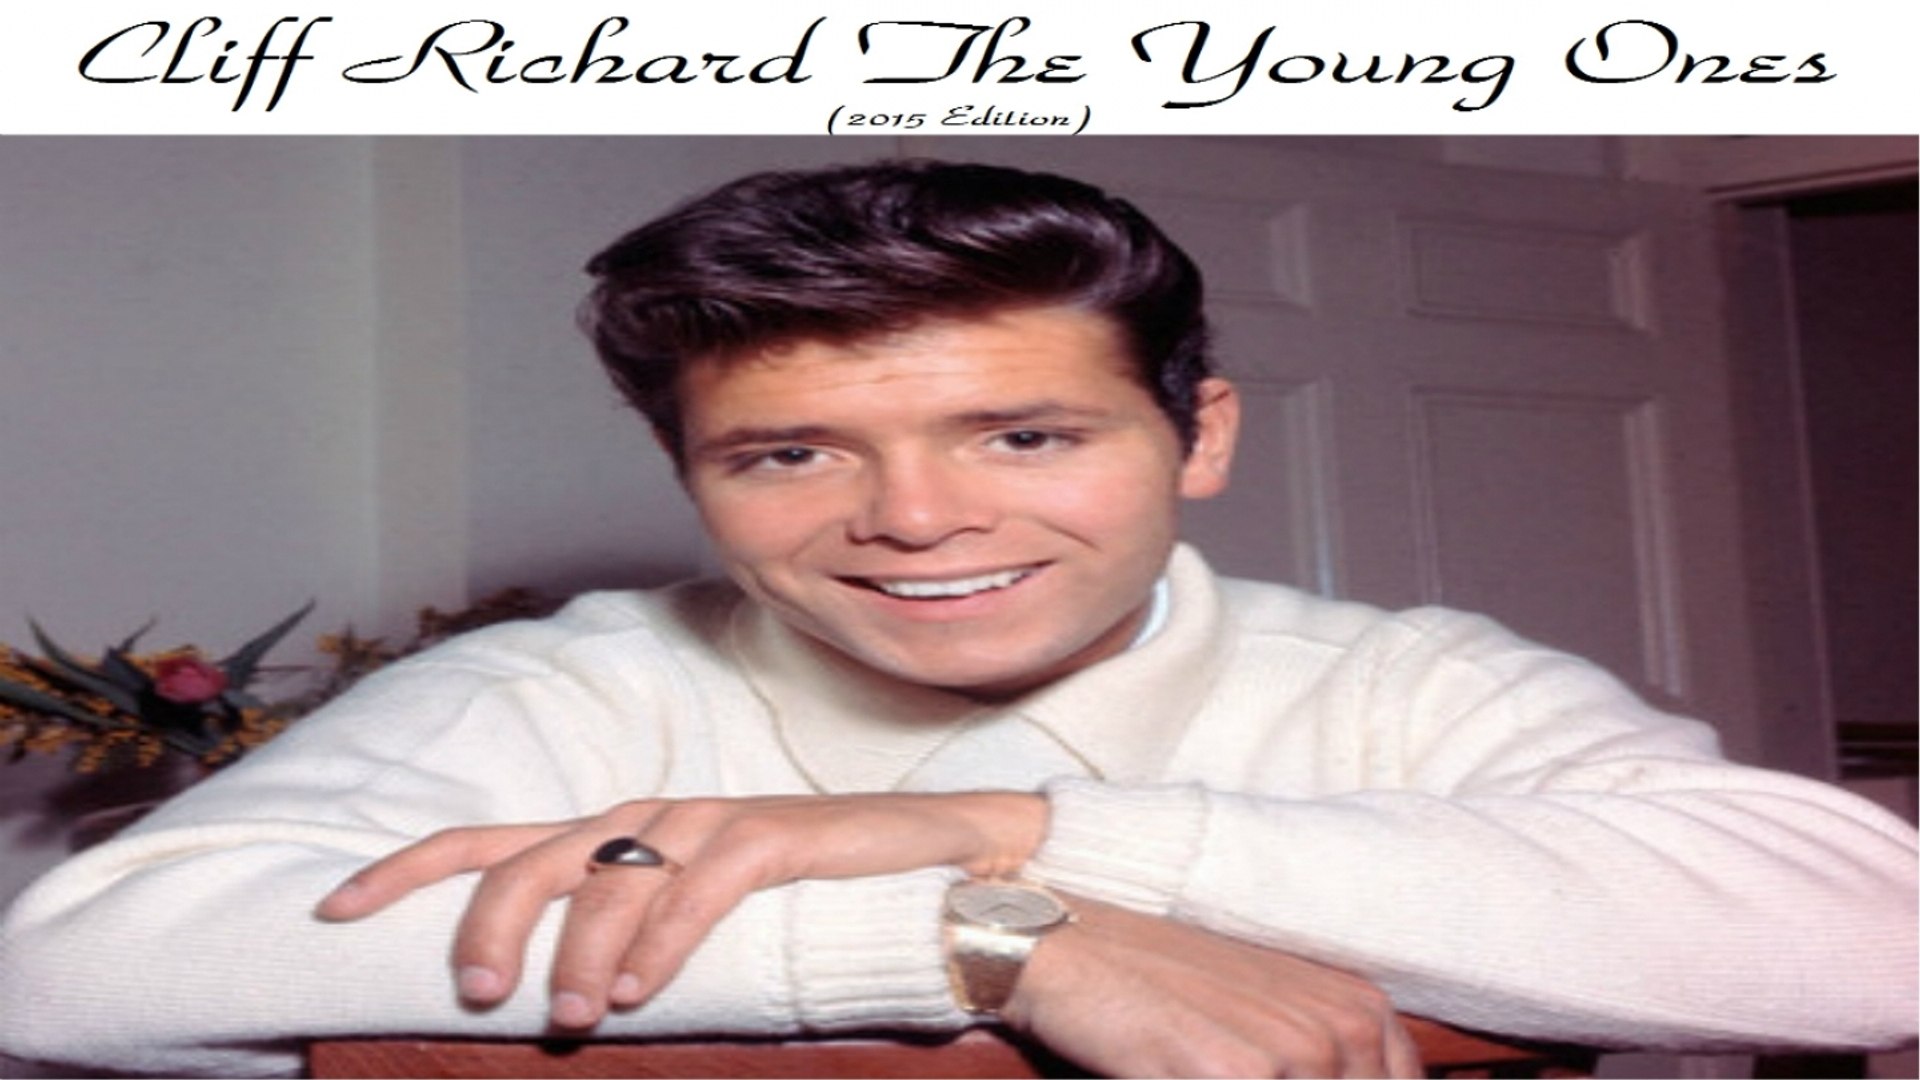 ⁣Cliff Richard Ft. The Shadows - The Young Ones - Remastered 2015